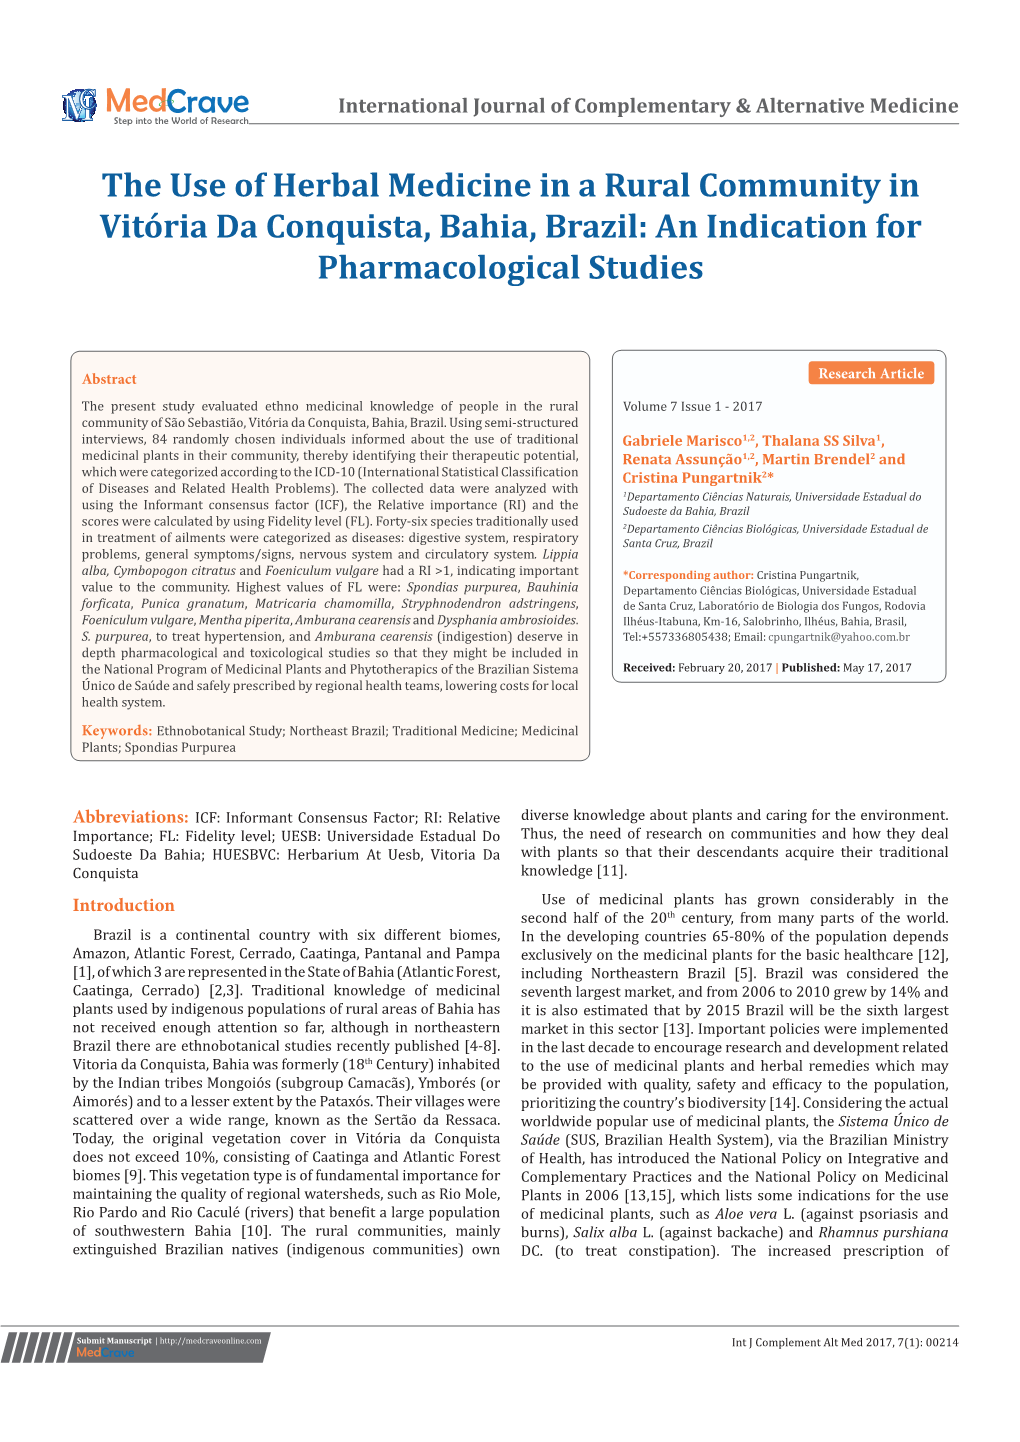 The Use of Herbal Medicine in a Rural Community in Vitória Da Conquista, Bahia, Brazil: an Indication for Pharmacological Studies